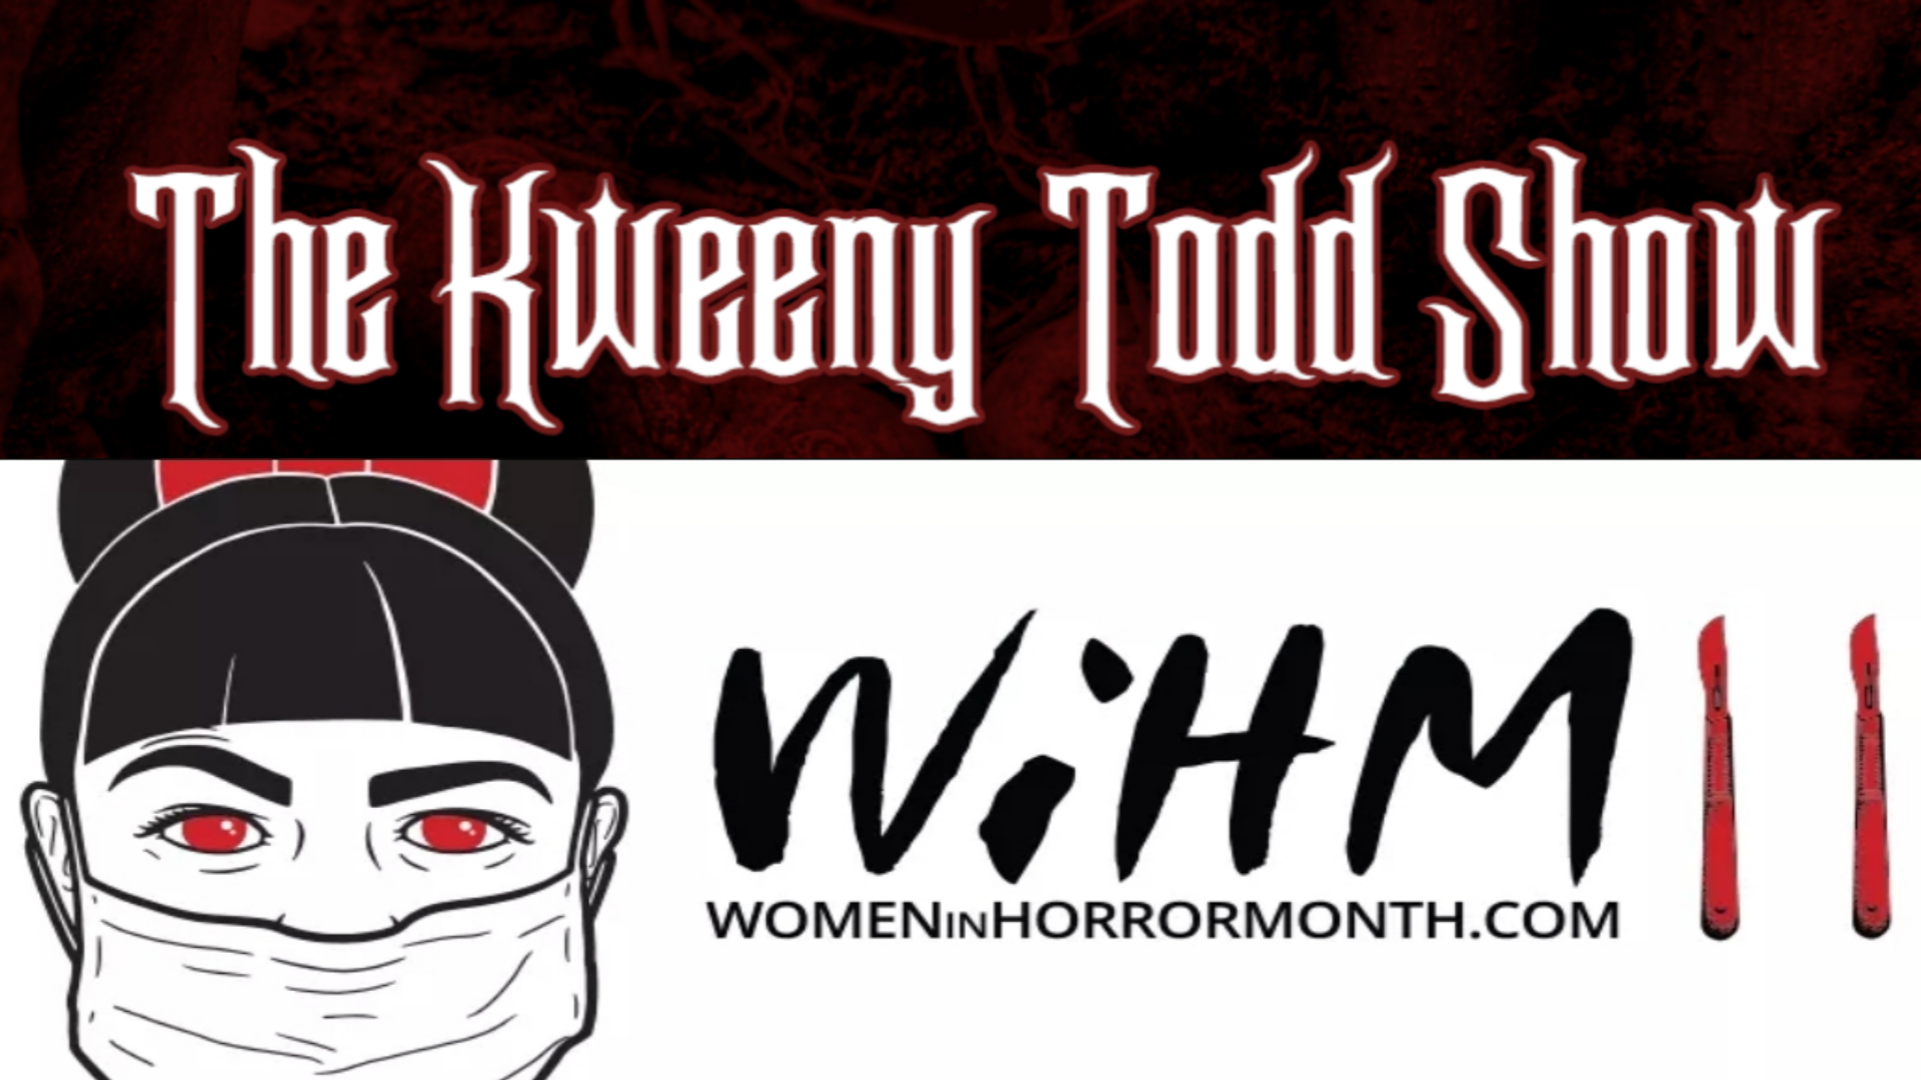 The Kweeny Todd Show’s 3rd Annual WiHM Celebration!